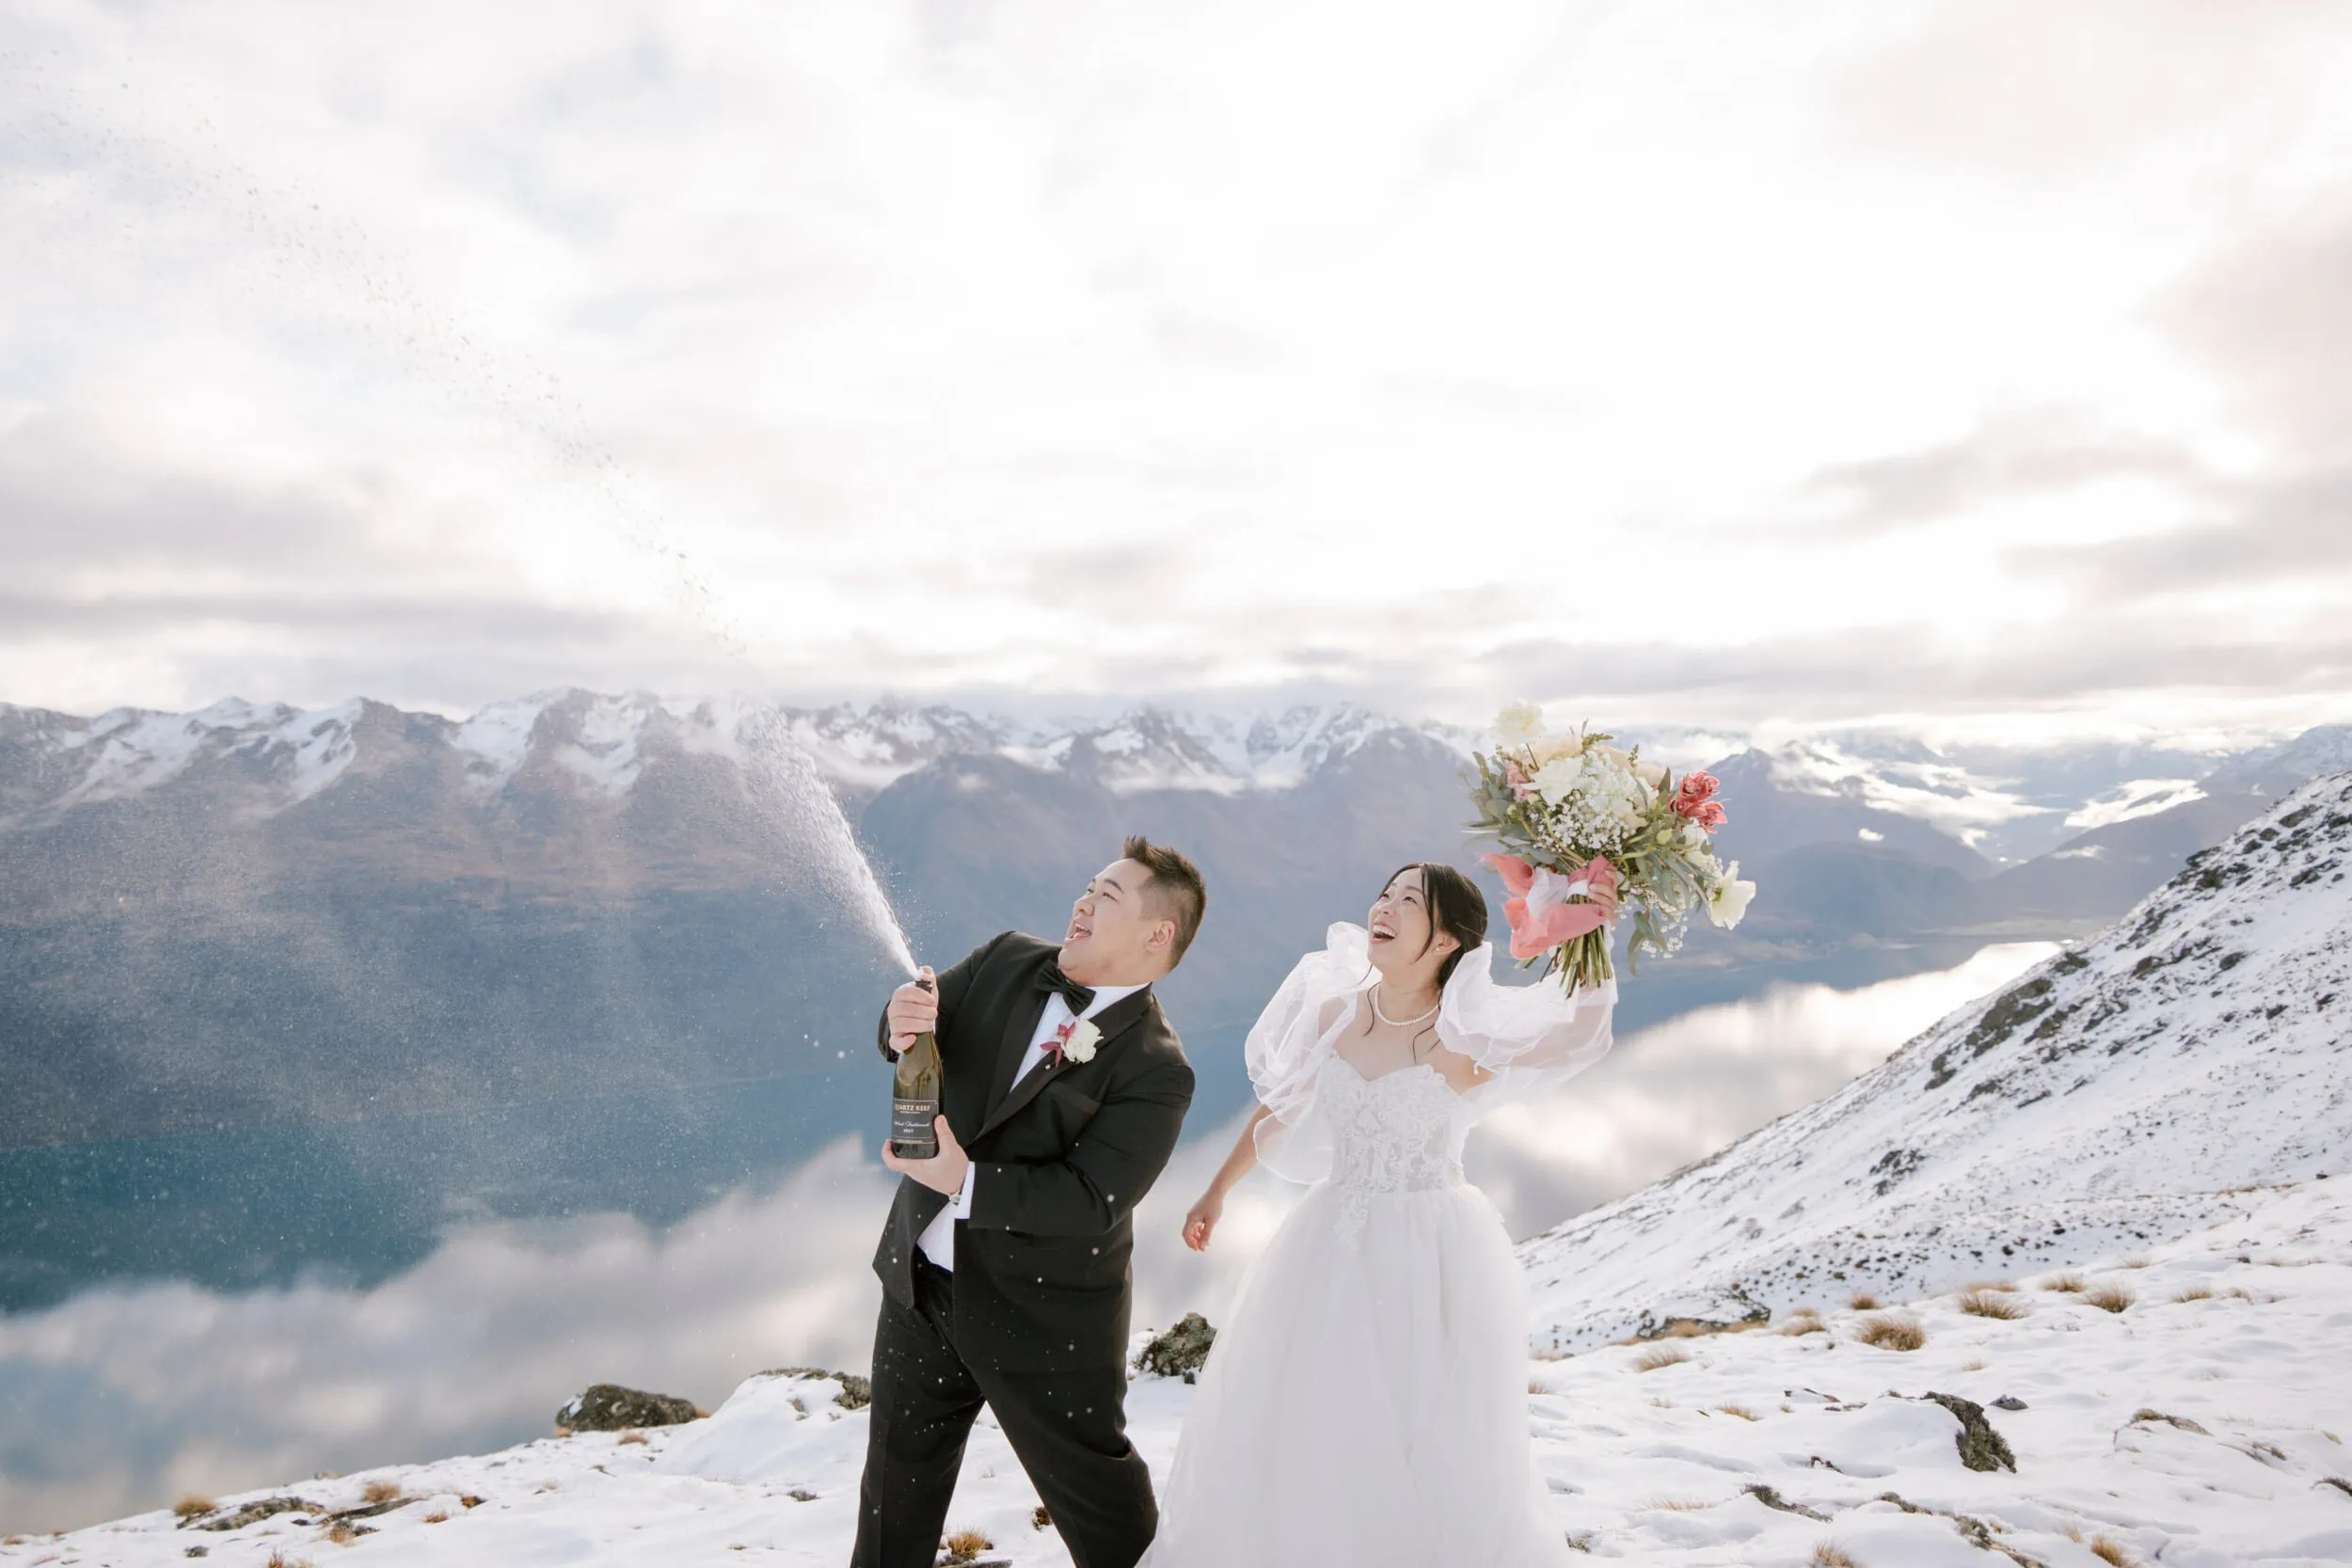 Queenstown New Zealand Elopement Wedding Photographer - Lam and Wendy's unique Kamana Lakehouse wedding includes a thrilling heli shoot on a snow-covered mountain.